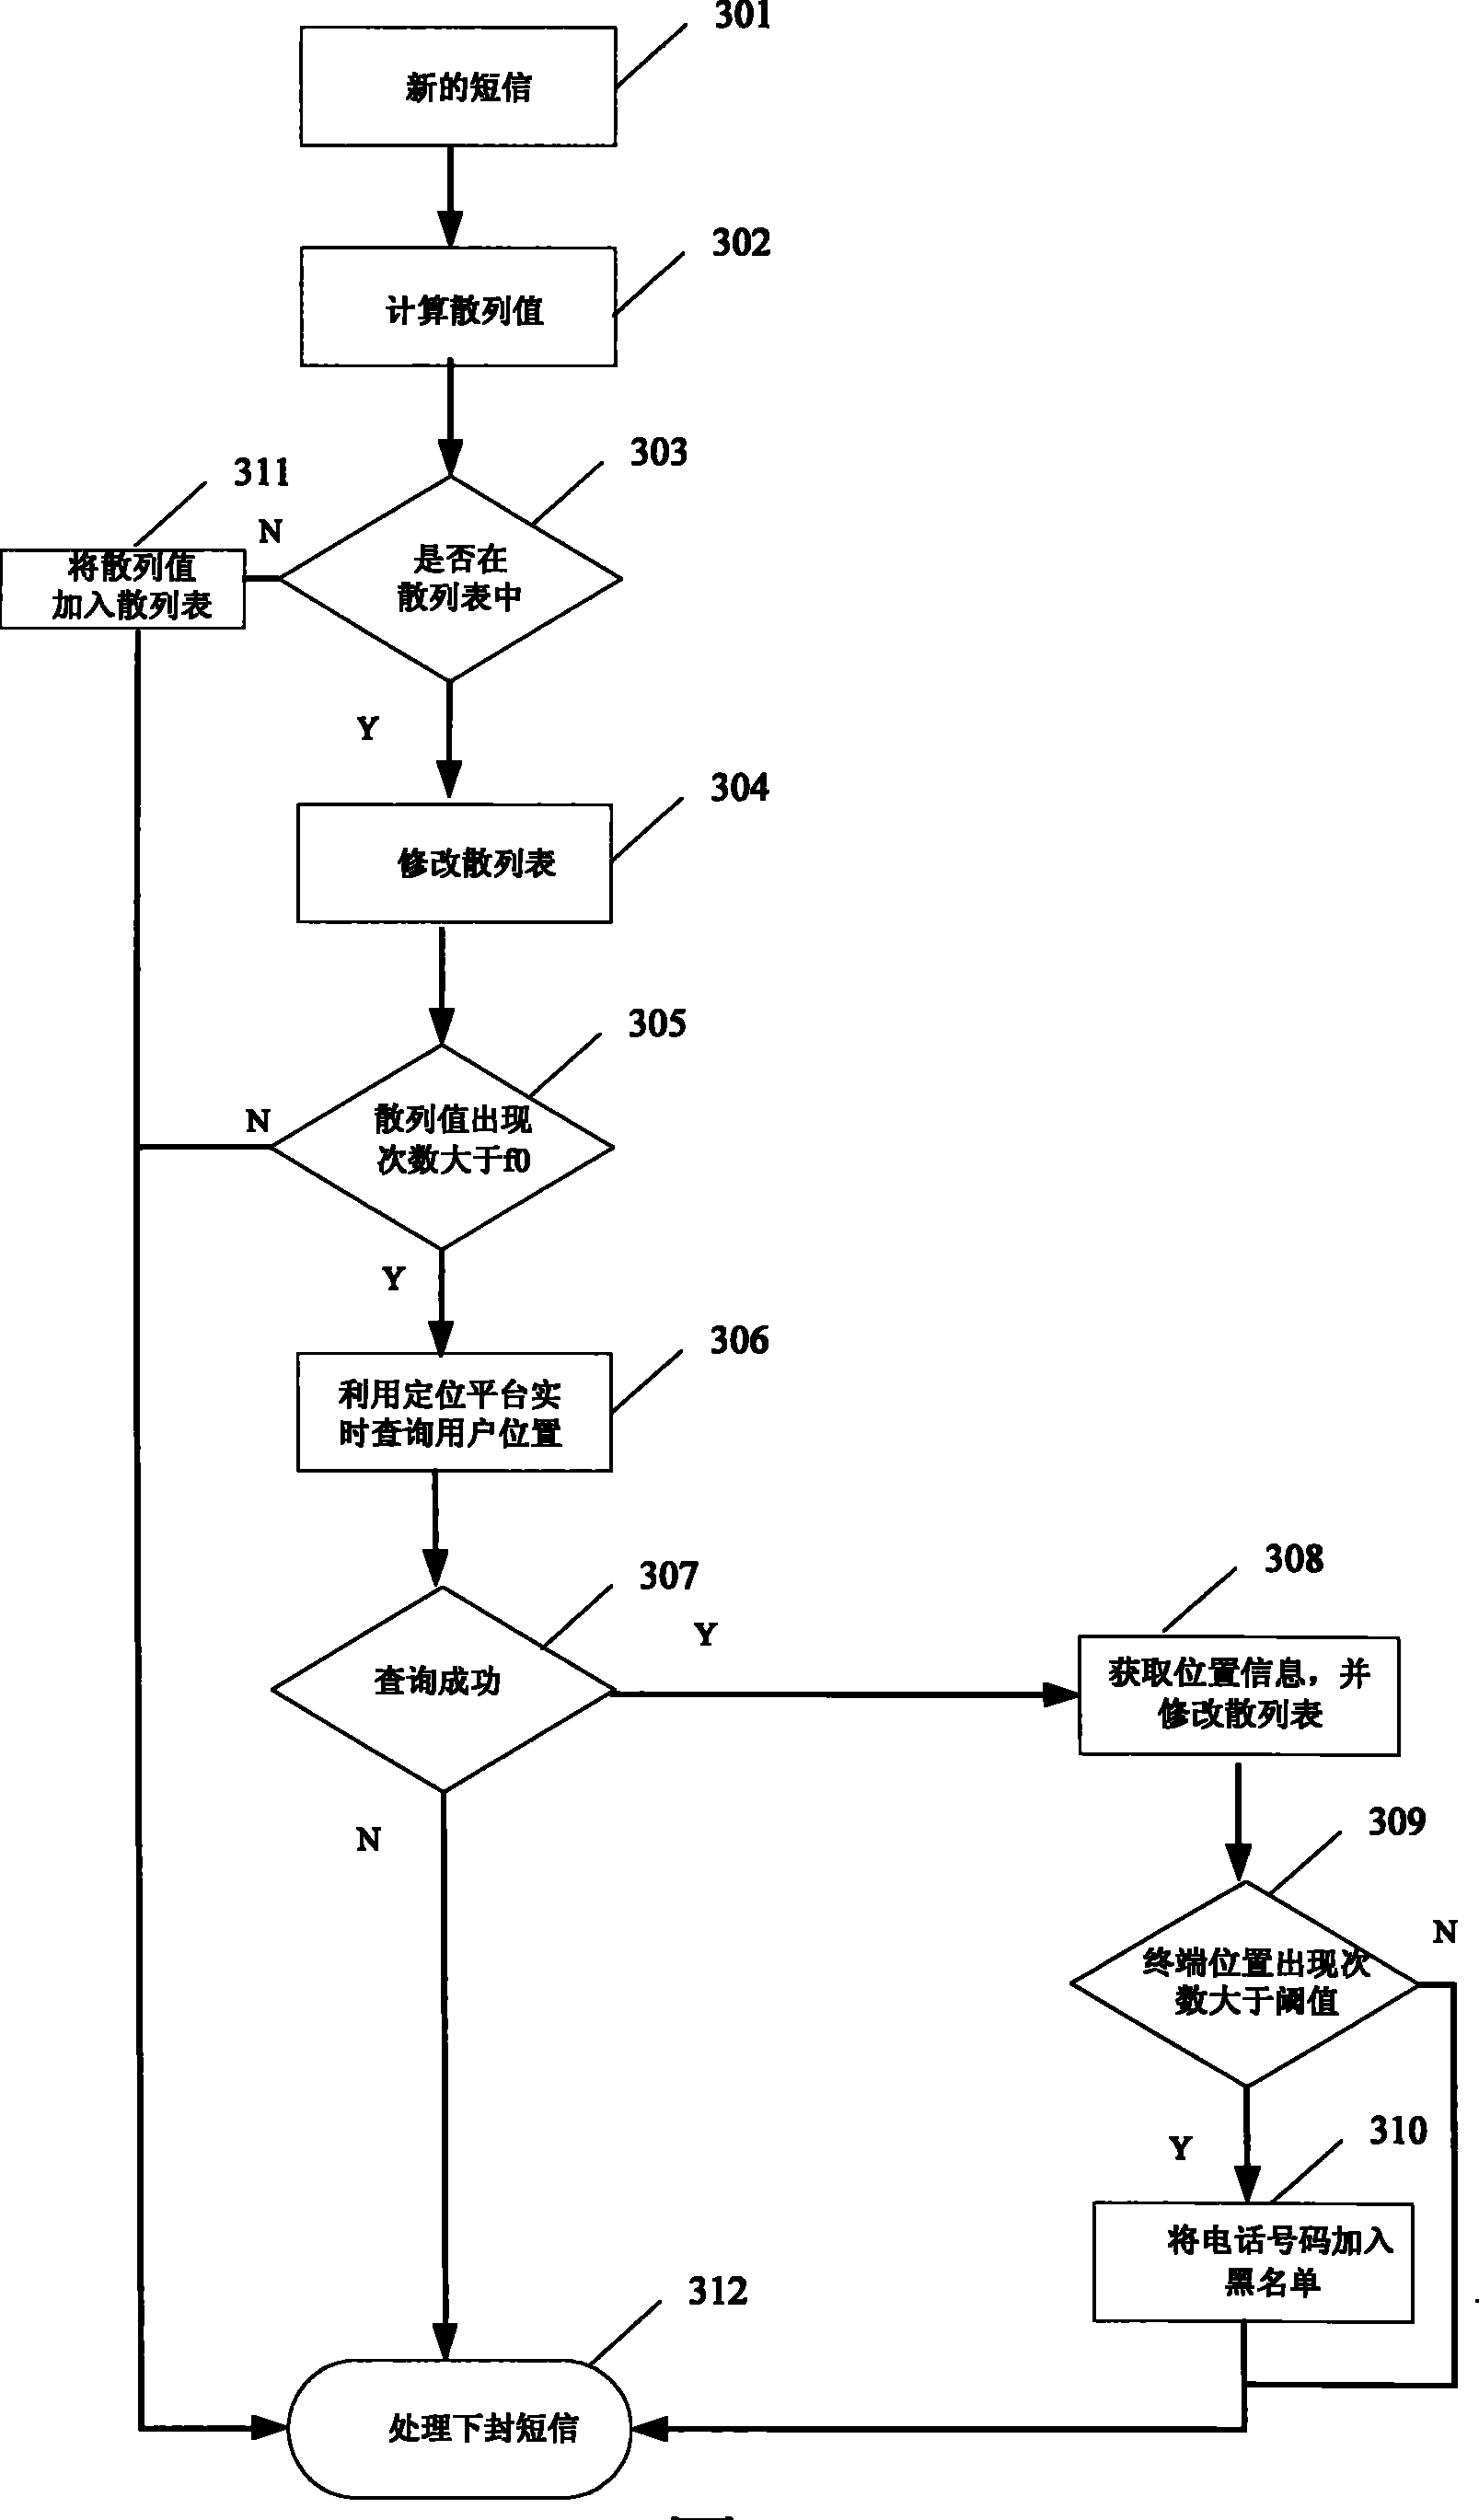 Rubbish short message recognition system and method based on calling number location and transmitted content